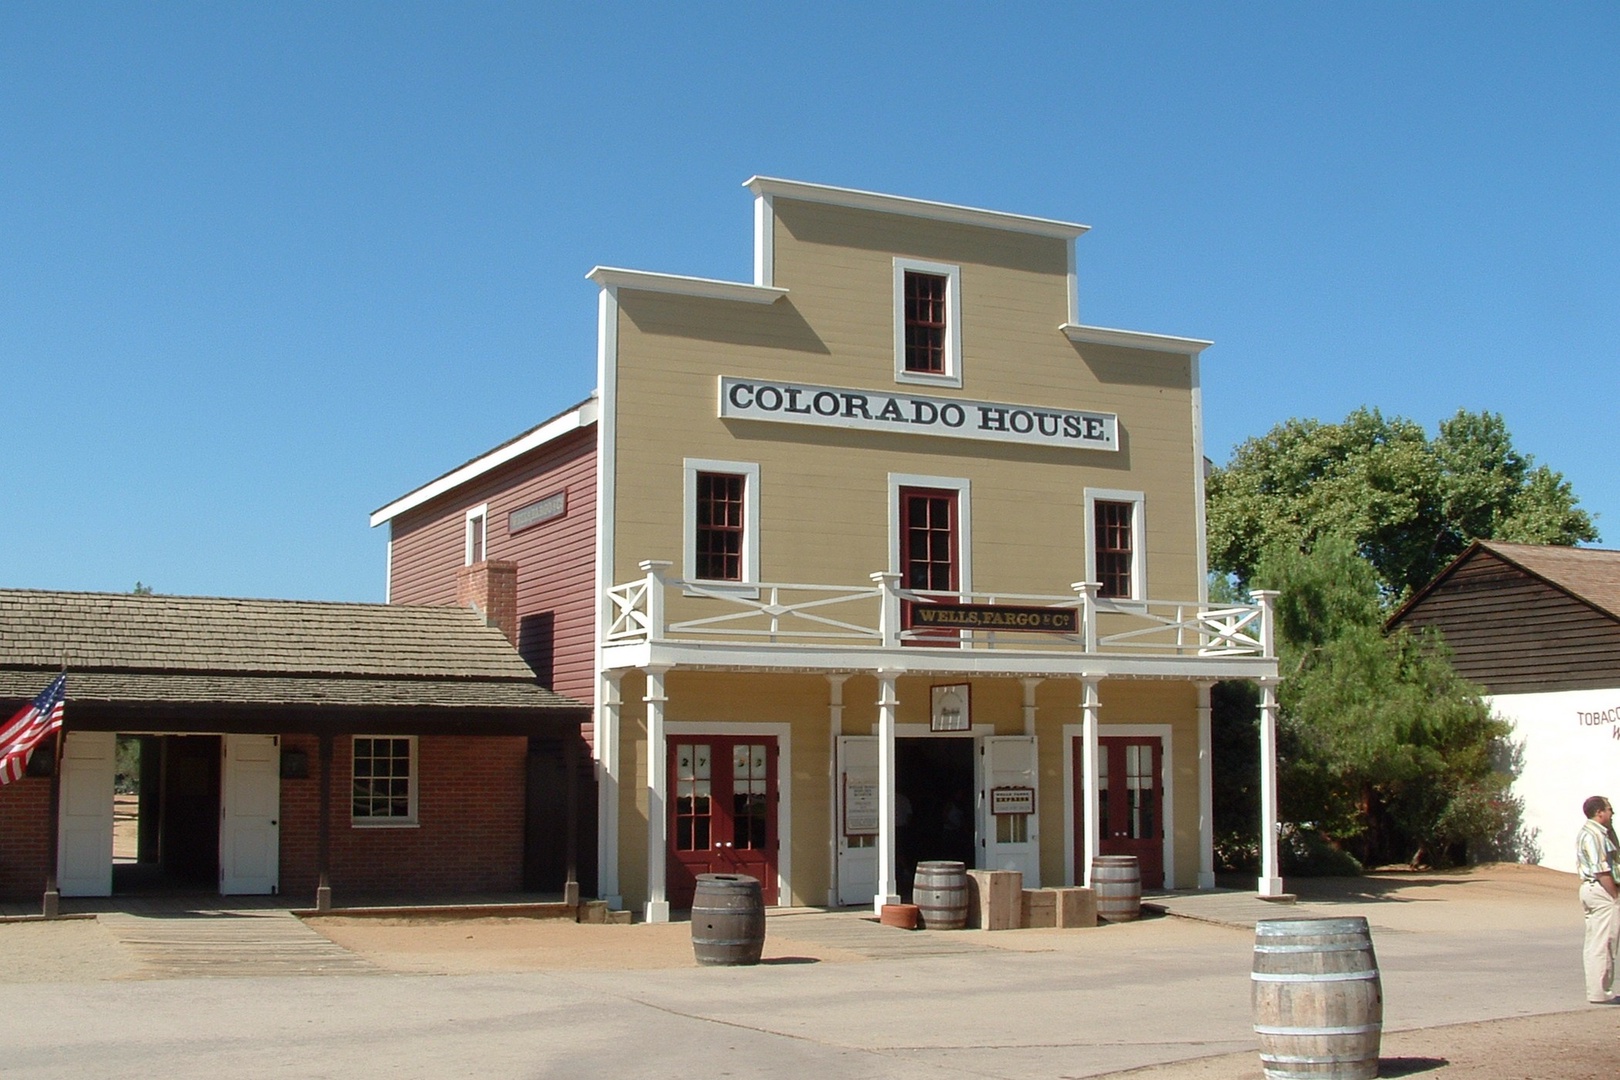 Old West Attraction at The Square